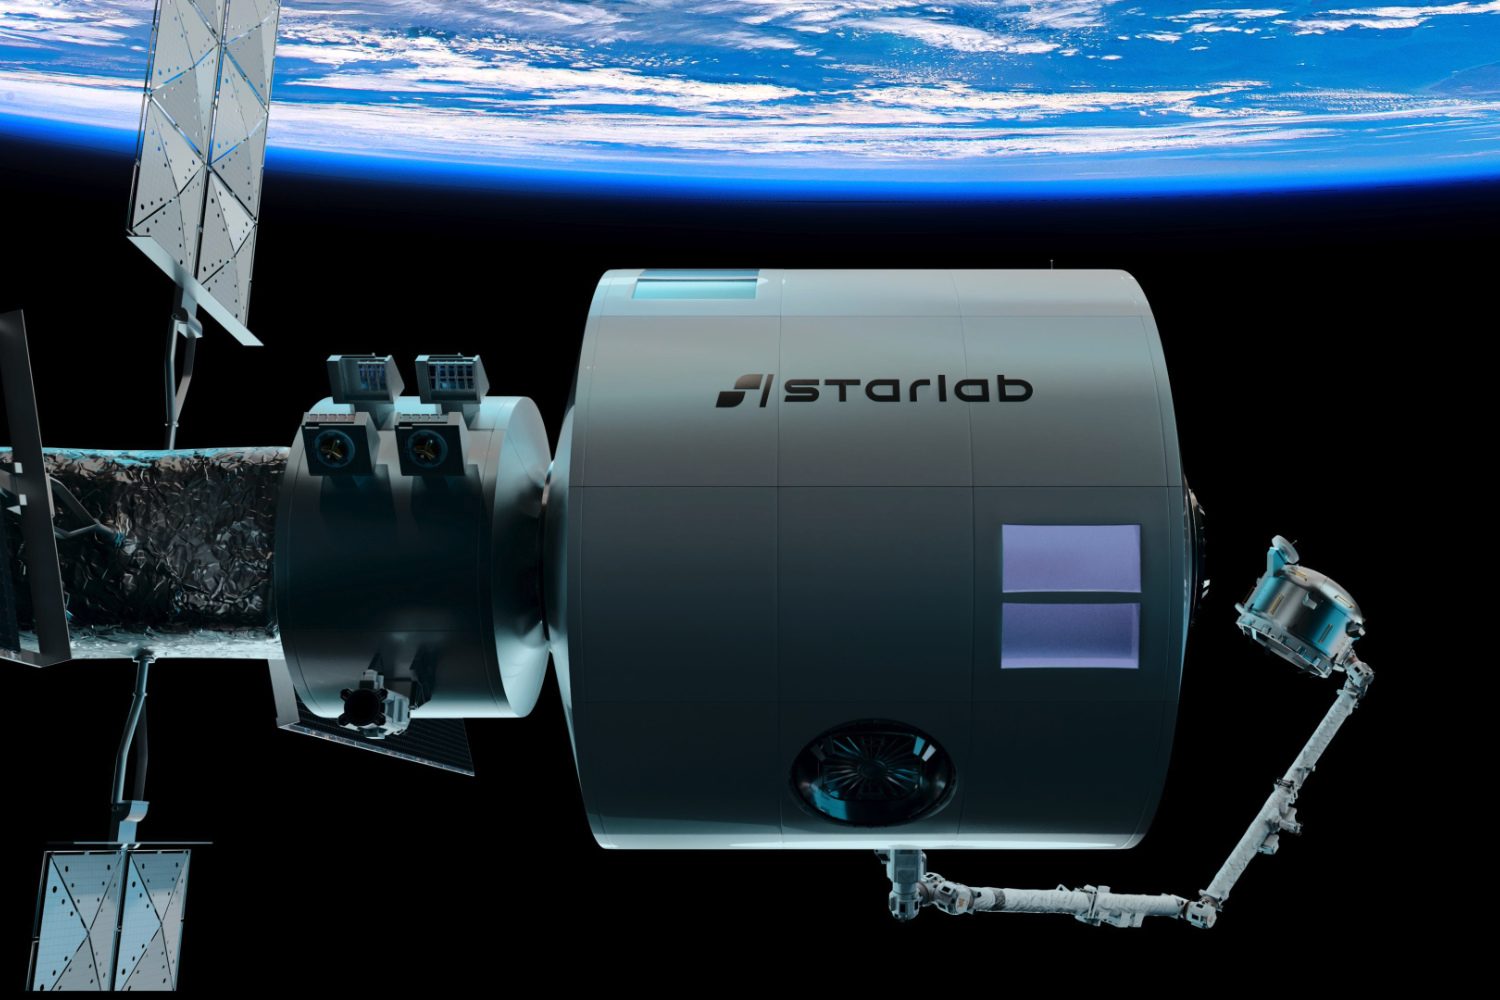 Starlab Station Spatiale